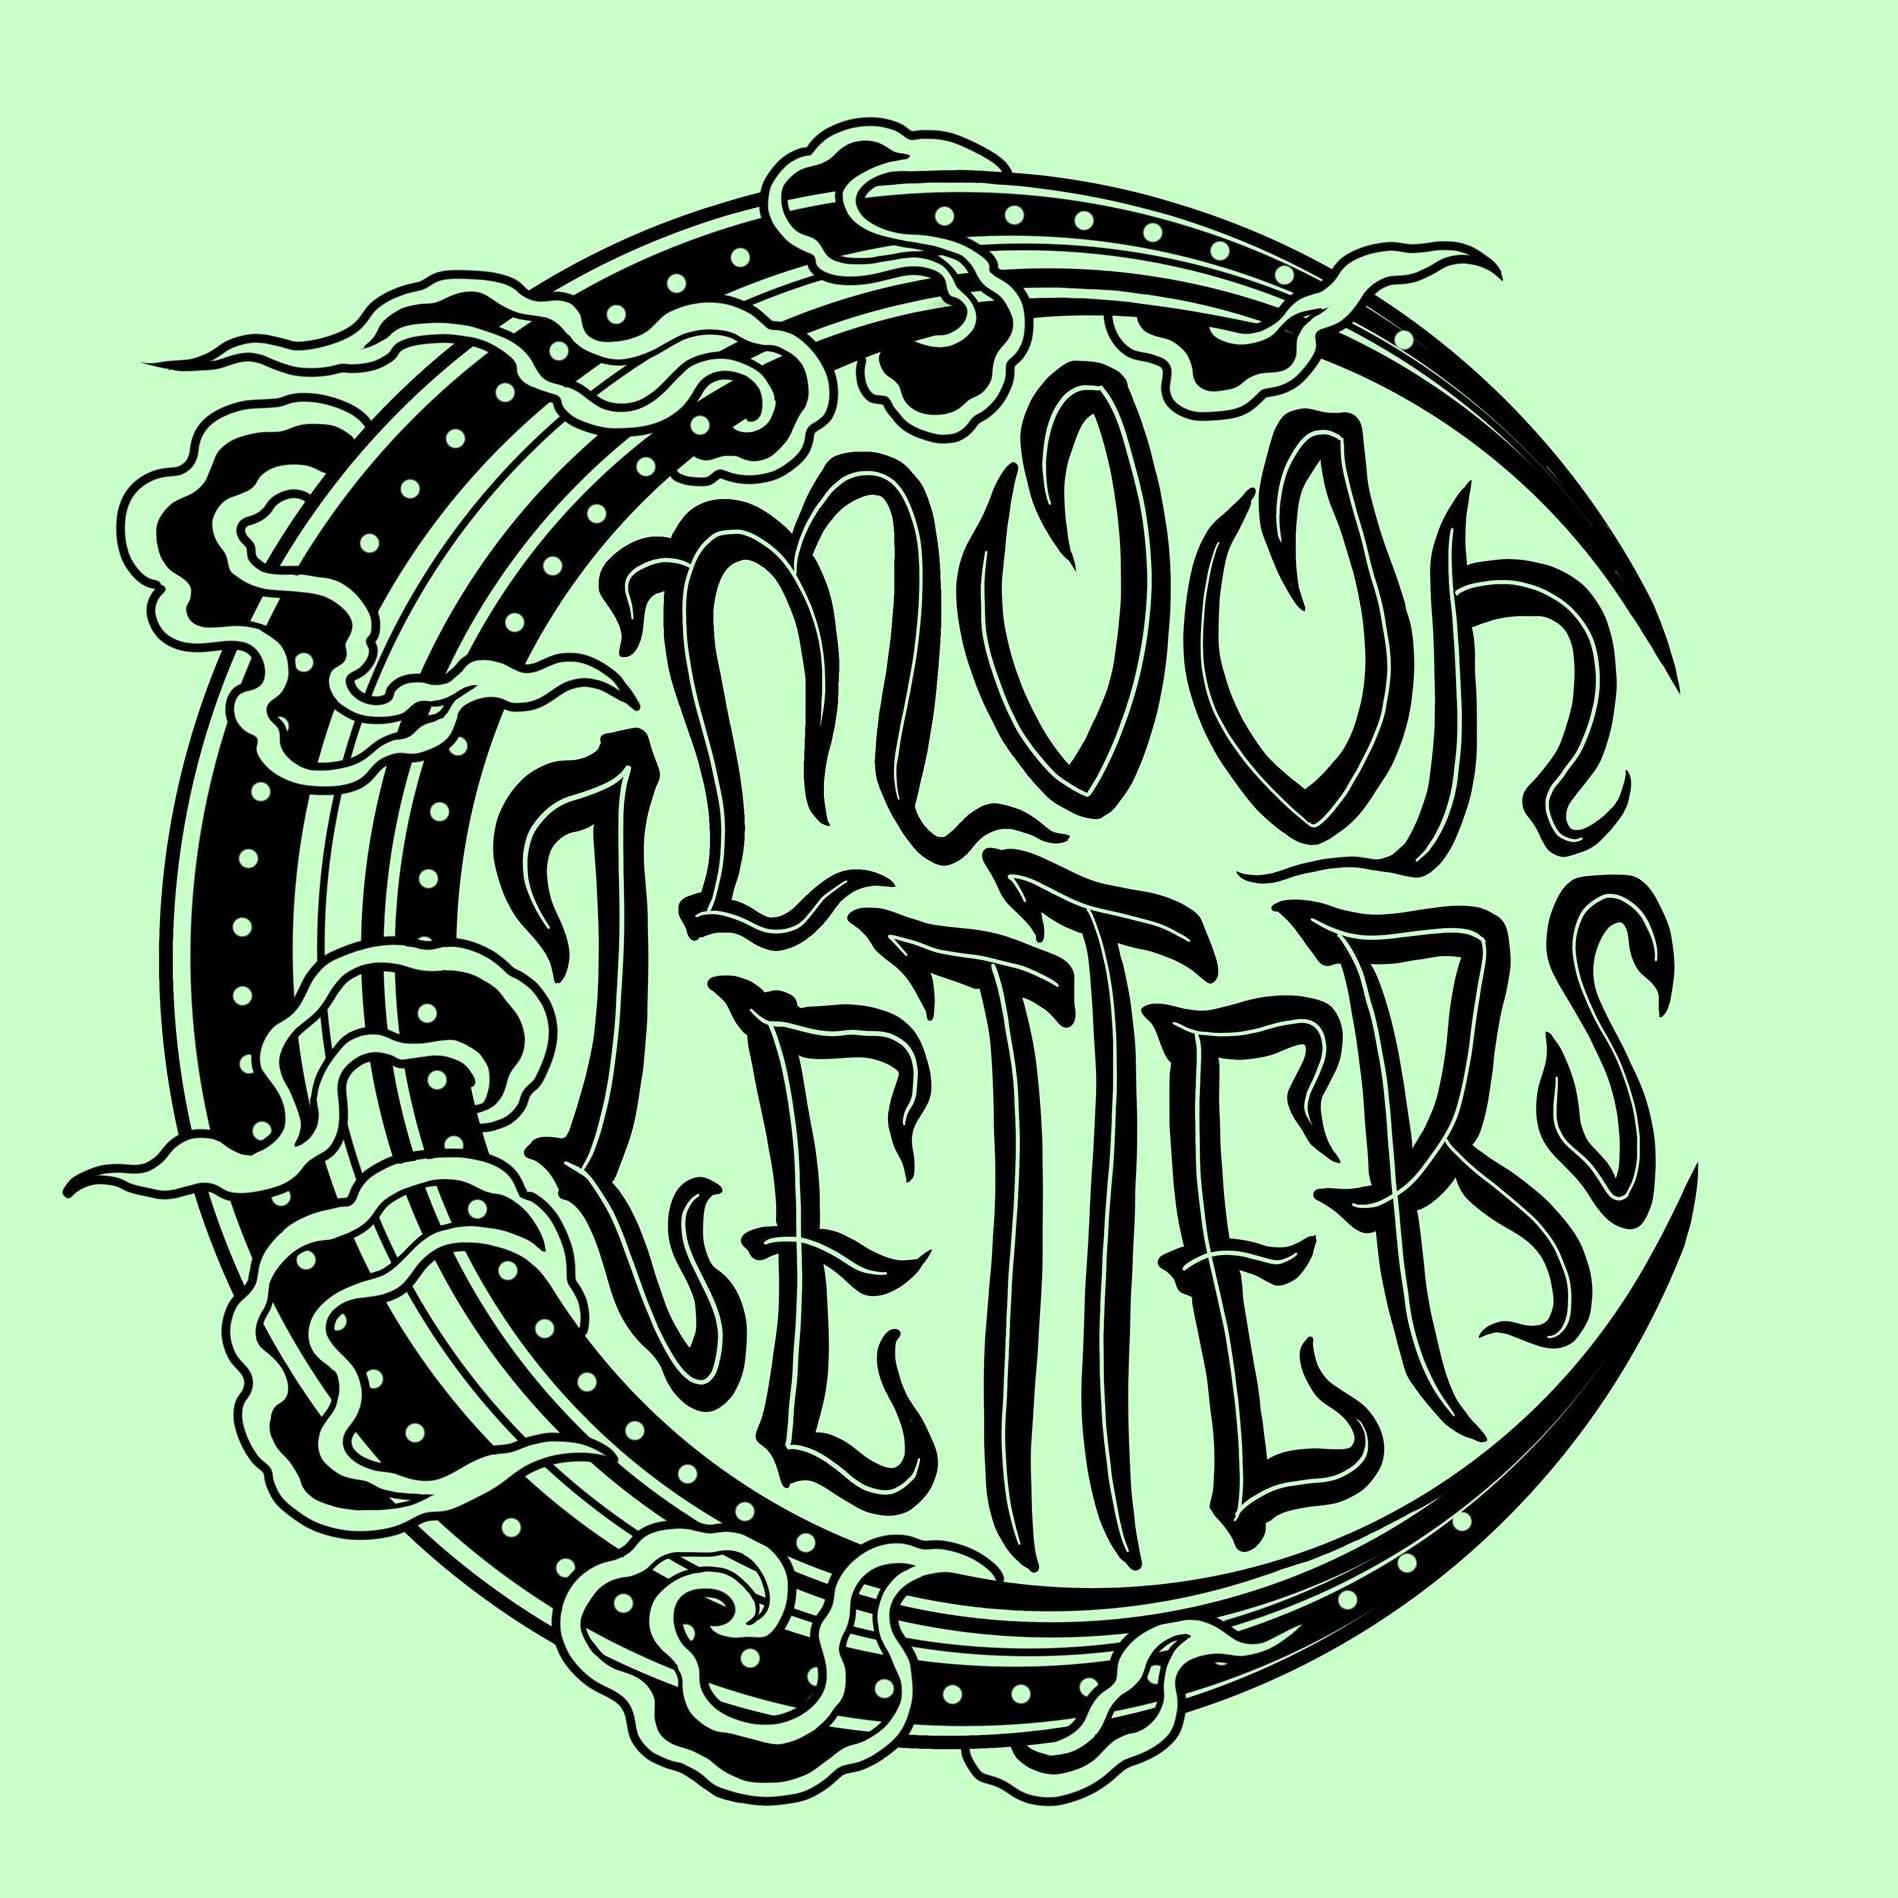 Moon Letters